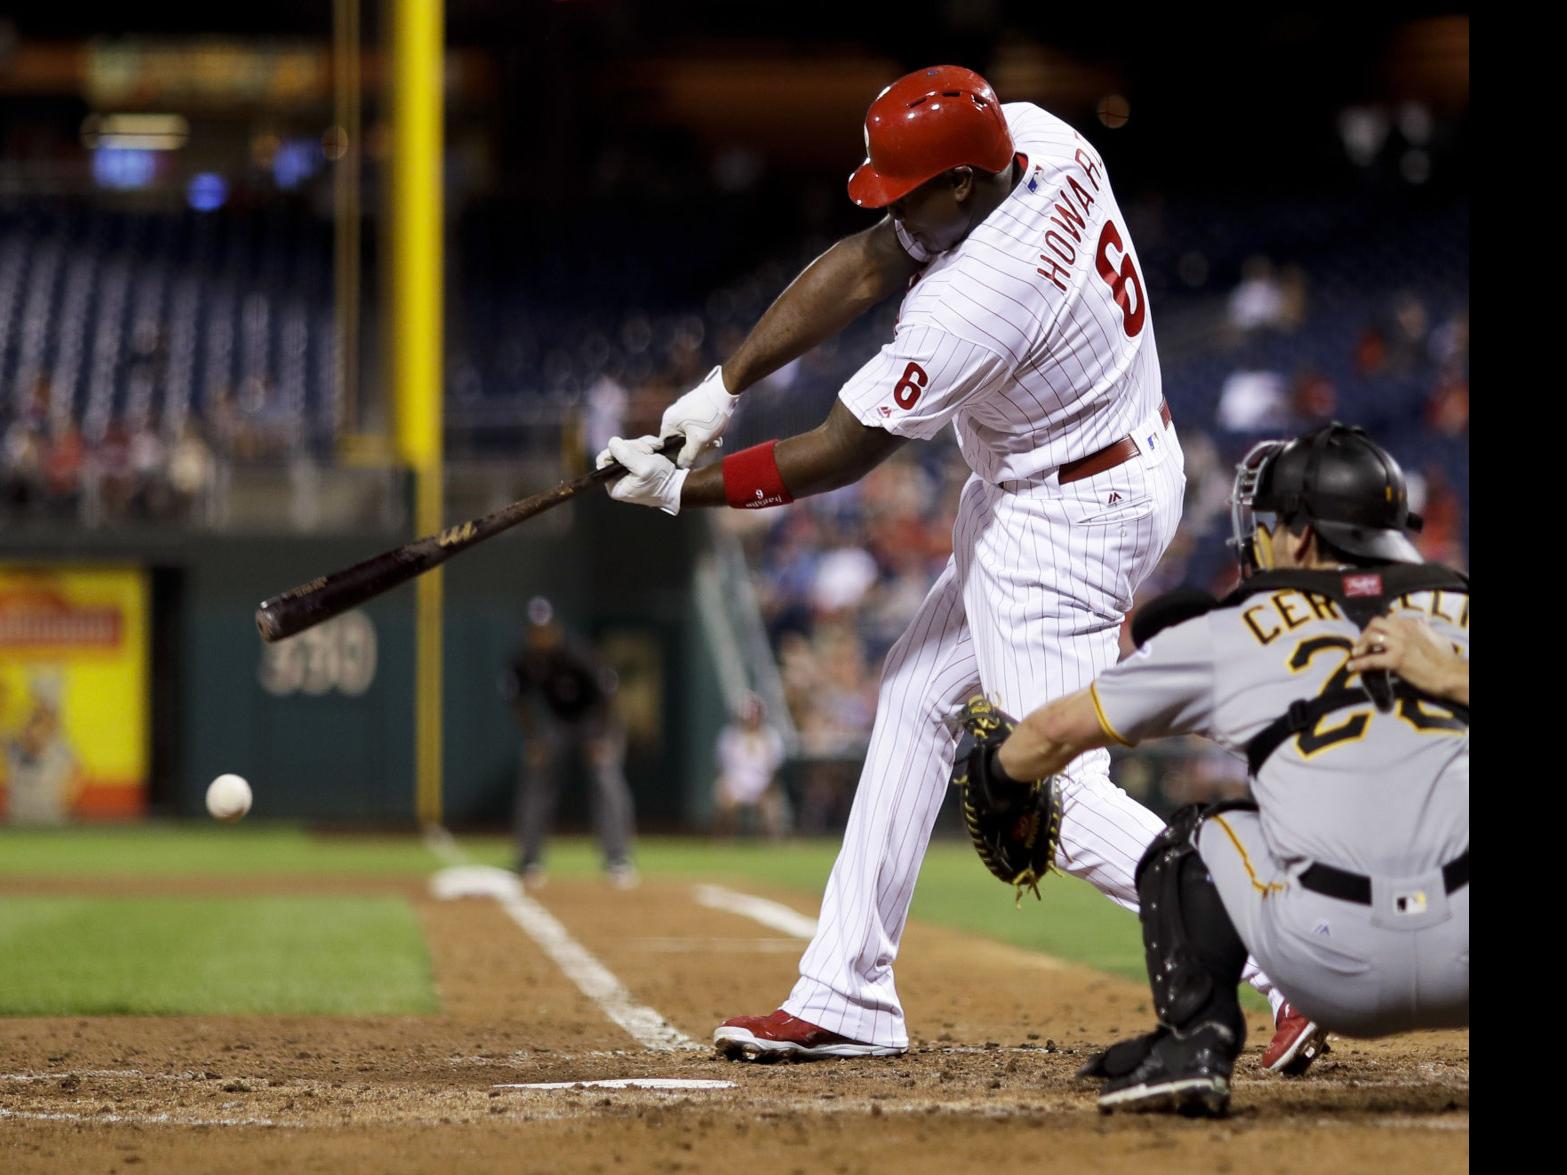 Ryan Howard signs minor league deal with Braves